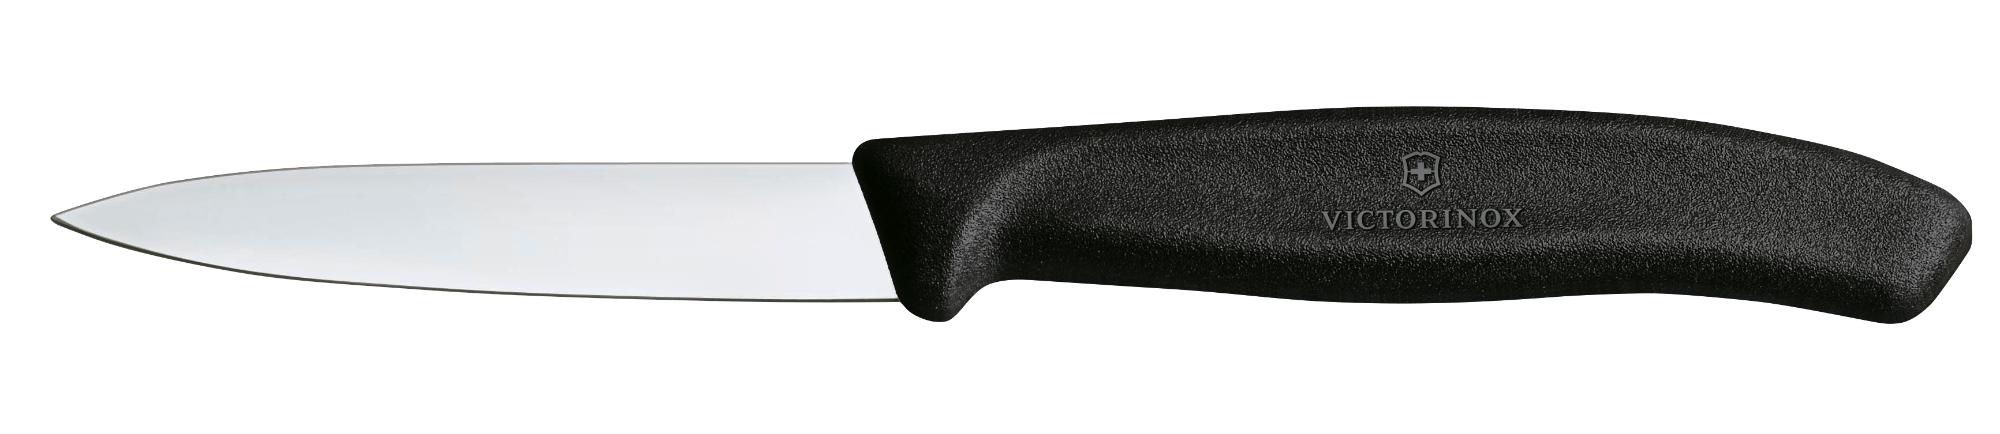 Swiss Classic vegetable knife, smooth, 8 cm - black